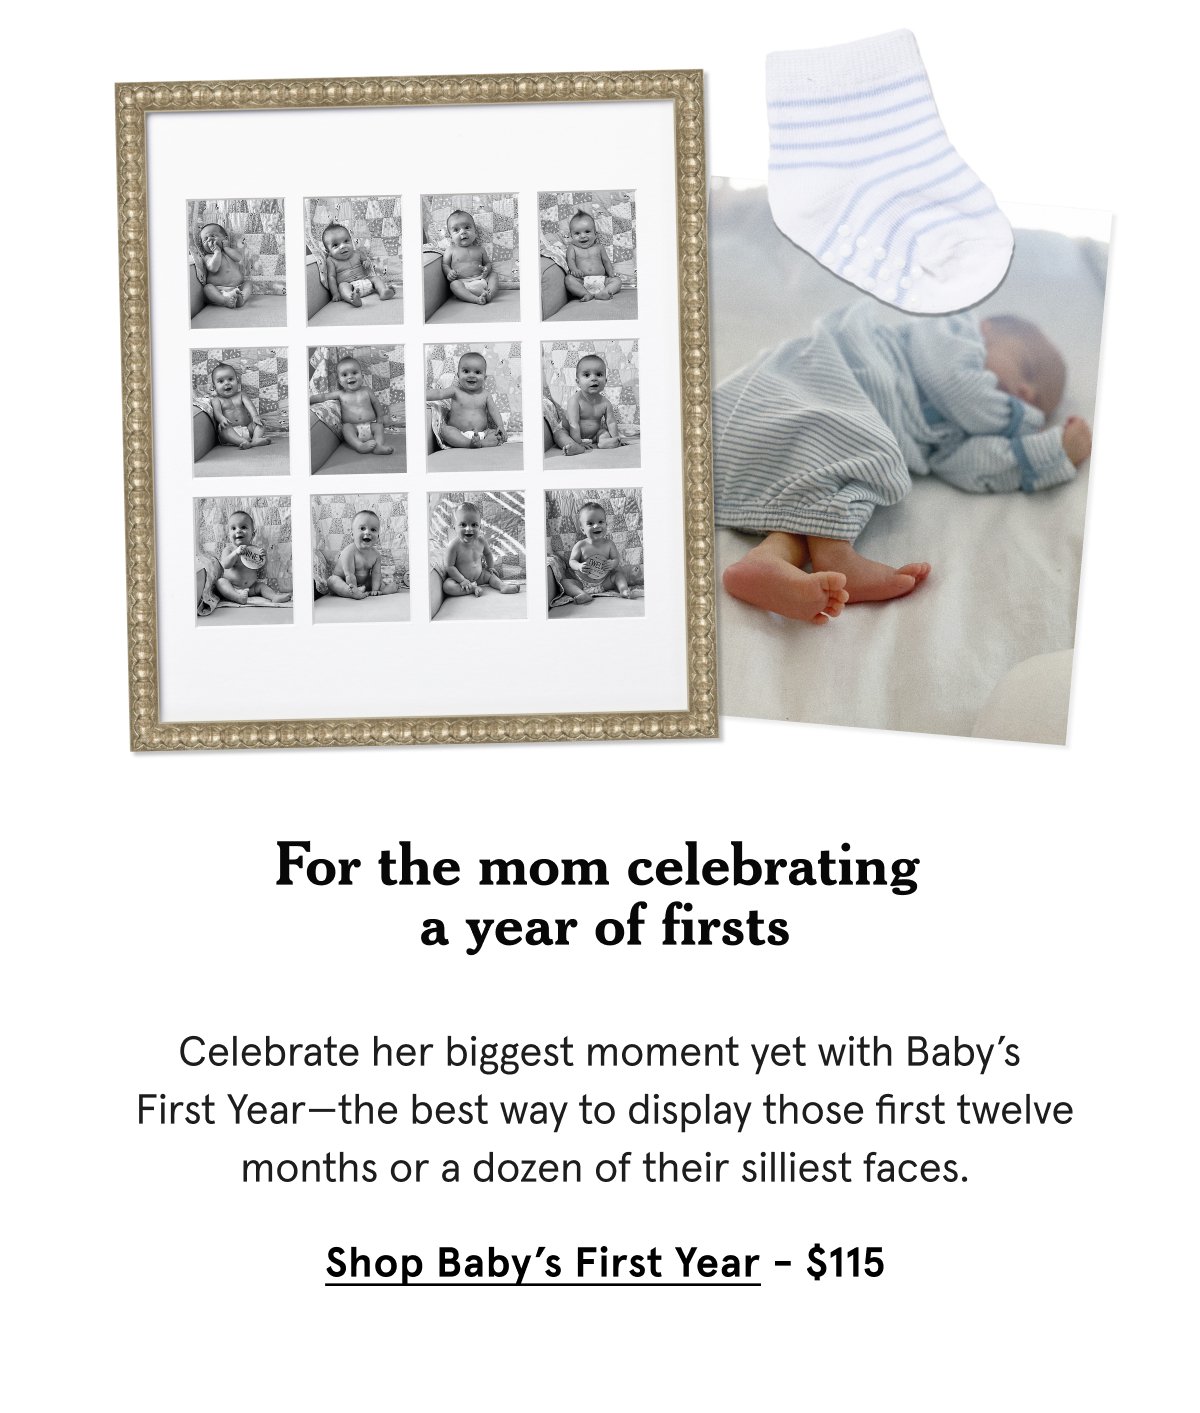 Celebrate her biggest moment yet with Baby’s First Year—the best way to display those first twelve months or a dozen of their silliest faces.